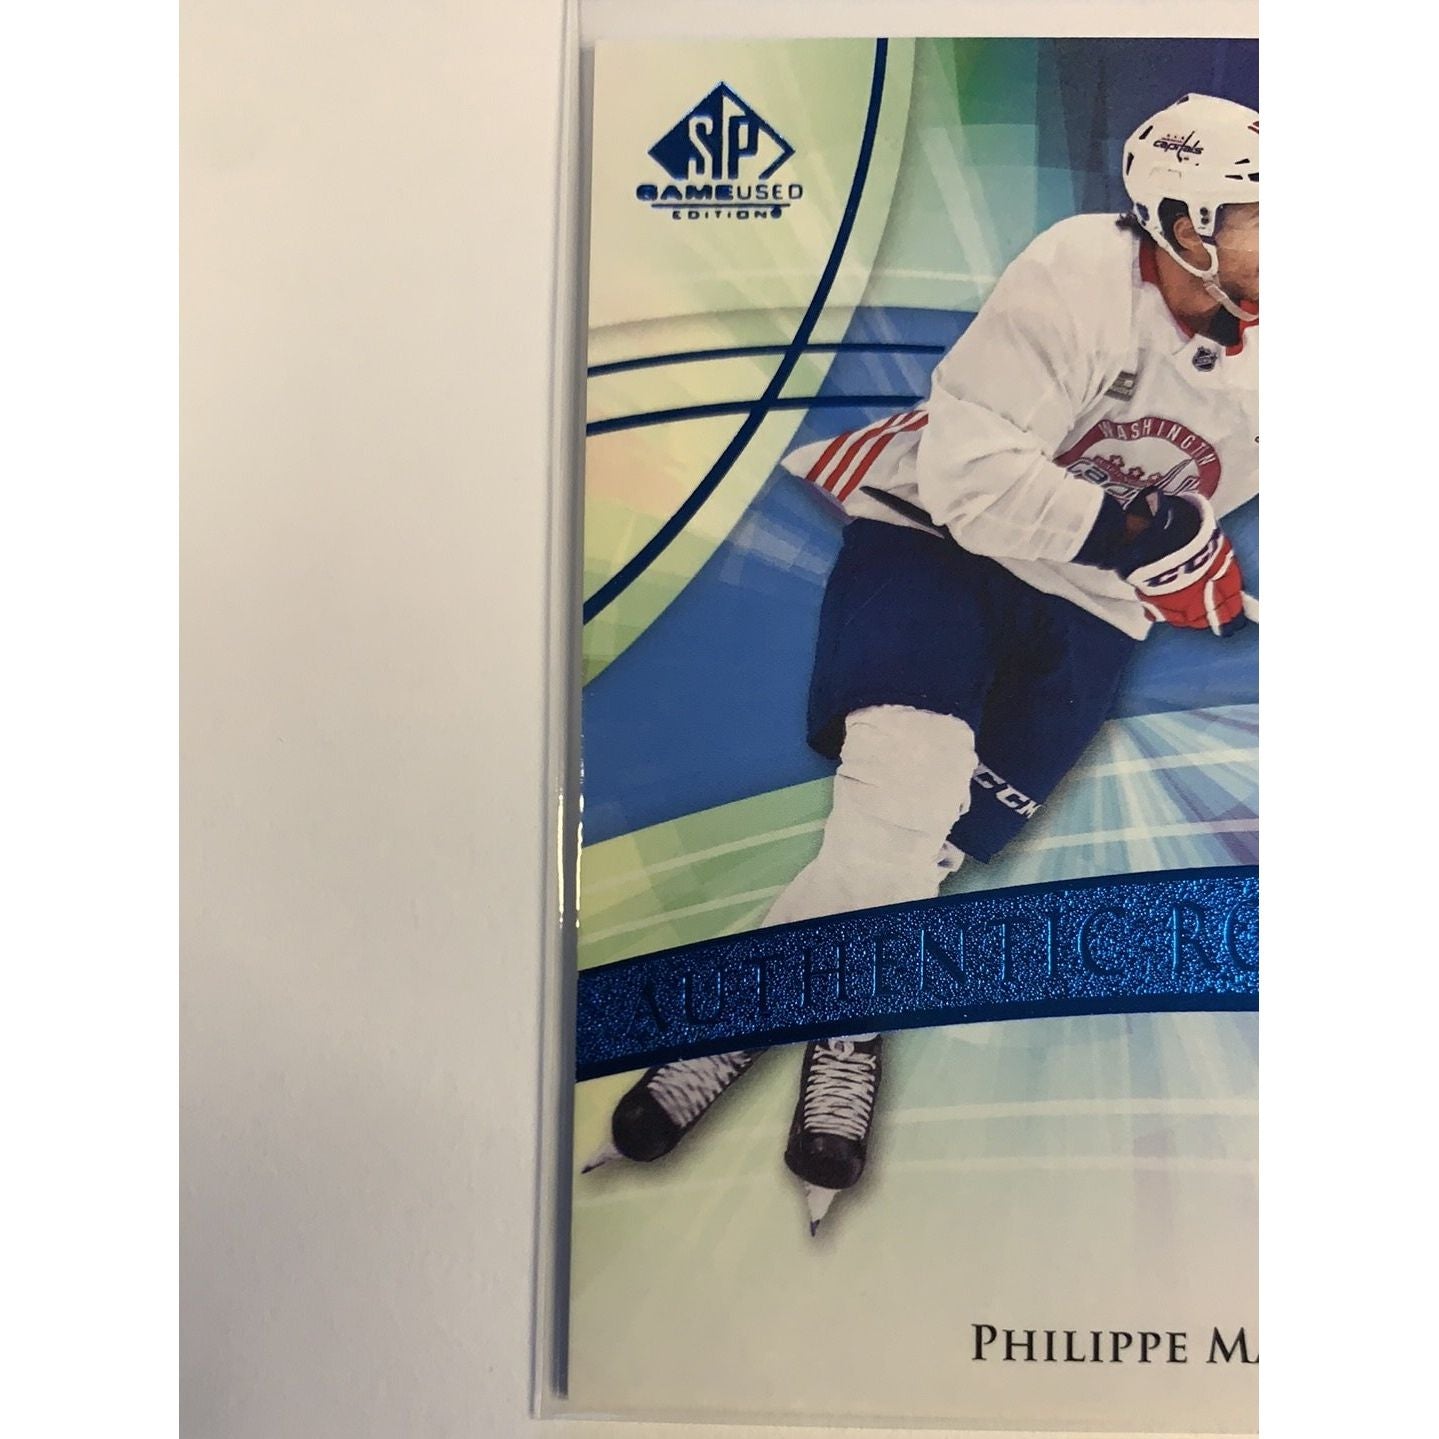  2020-21 SP Game Used Phillipe Maillet Authentic Rookies Blue Burst /199  Local Legends Cards & Collectibles